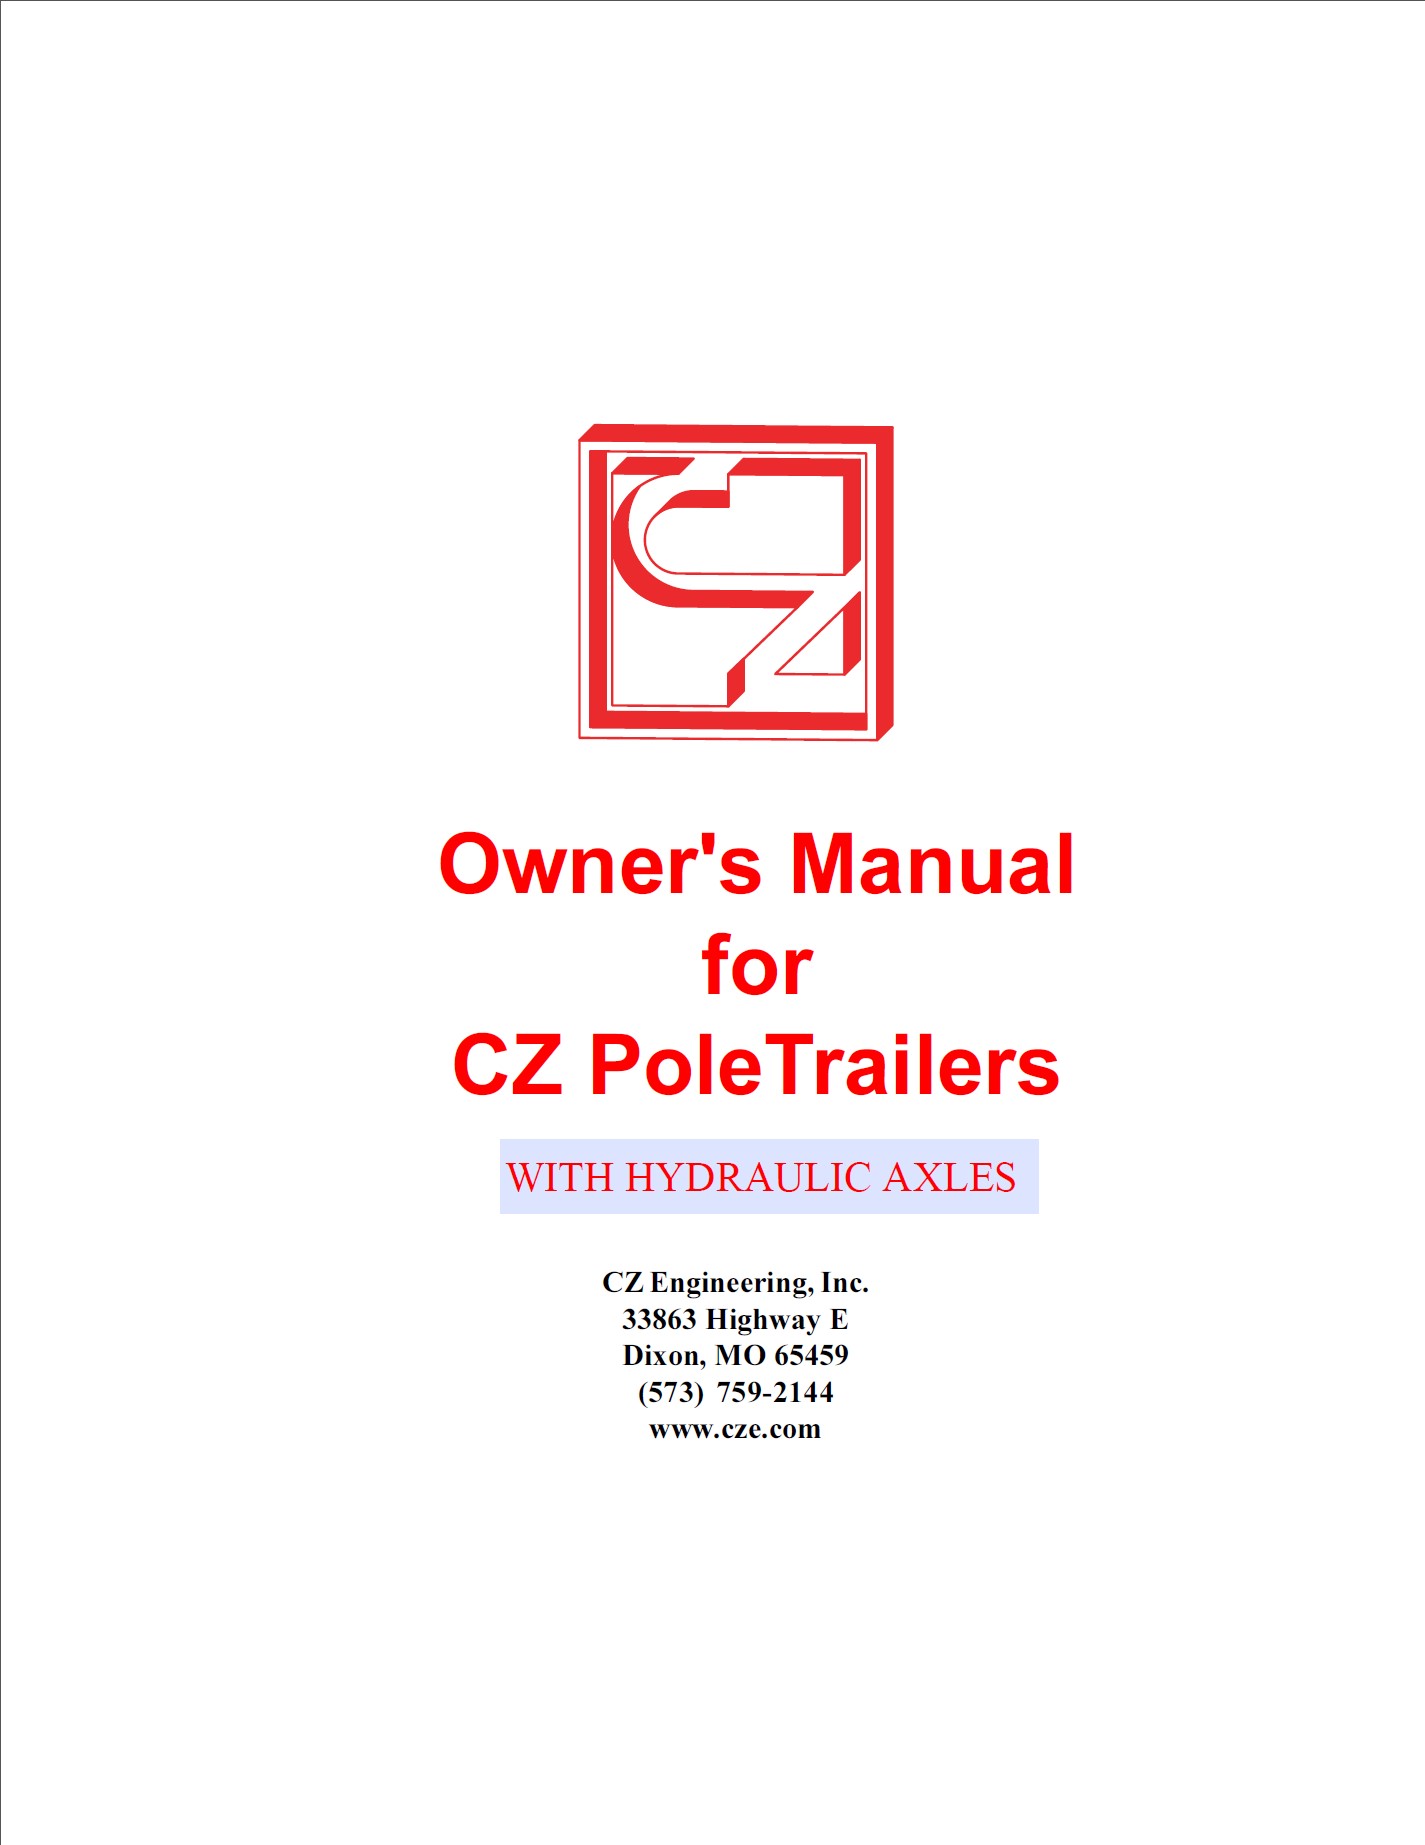 Owners Manual for Hydraulic Axles